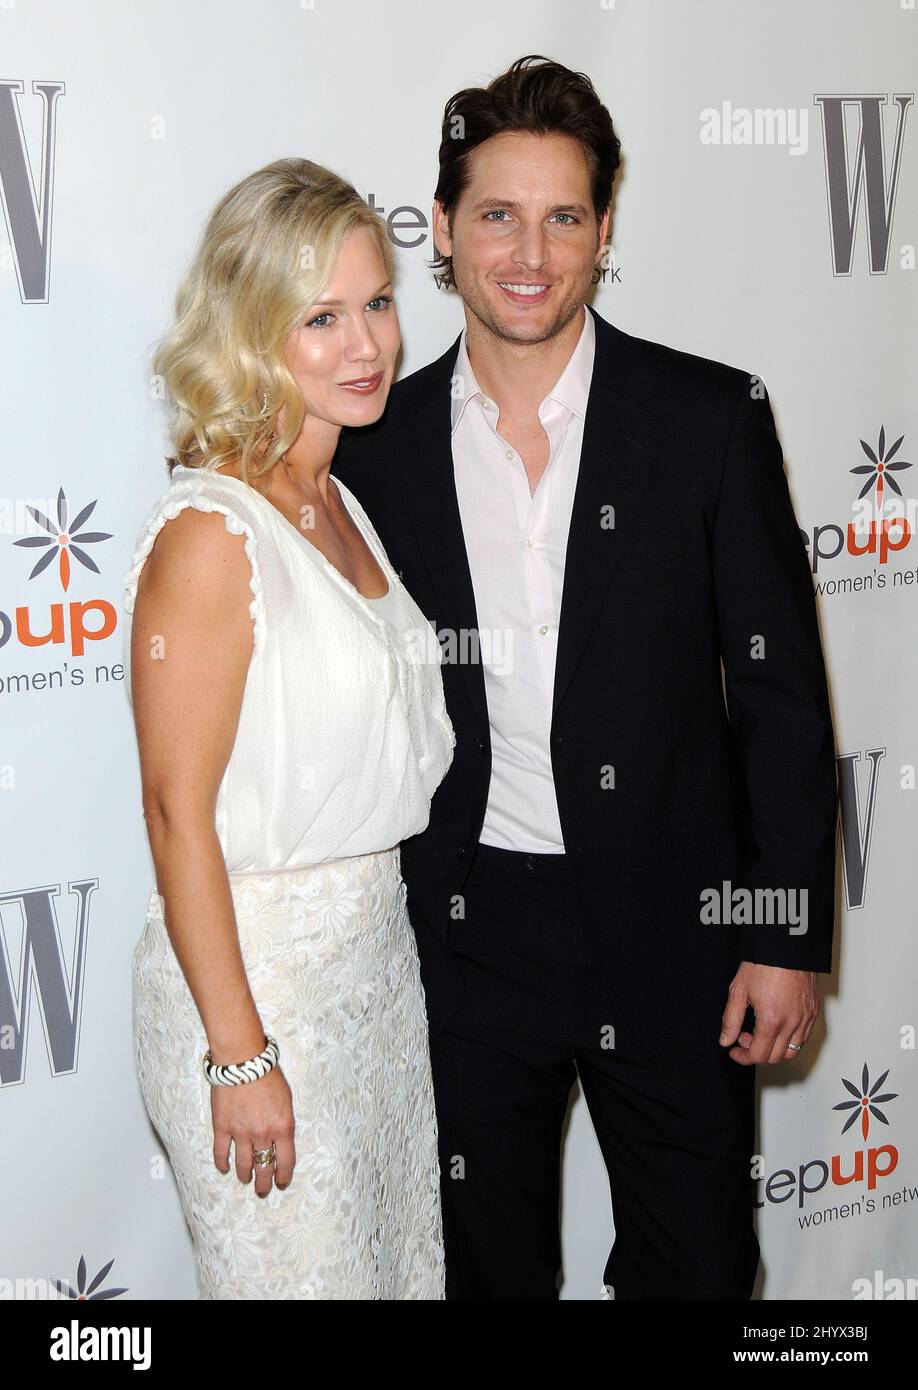 Jennie Garth And Peter Facinelli Attends The Step Up Women S Network